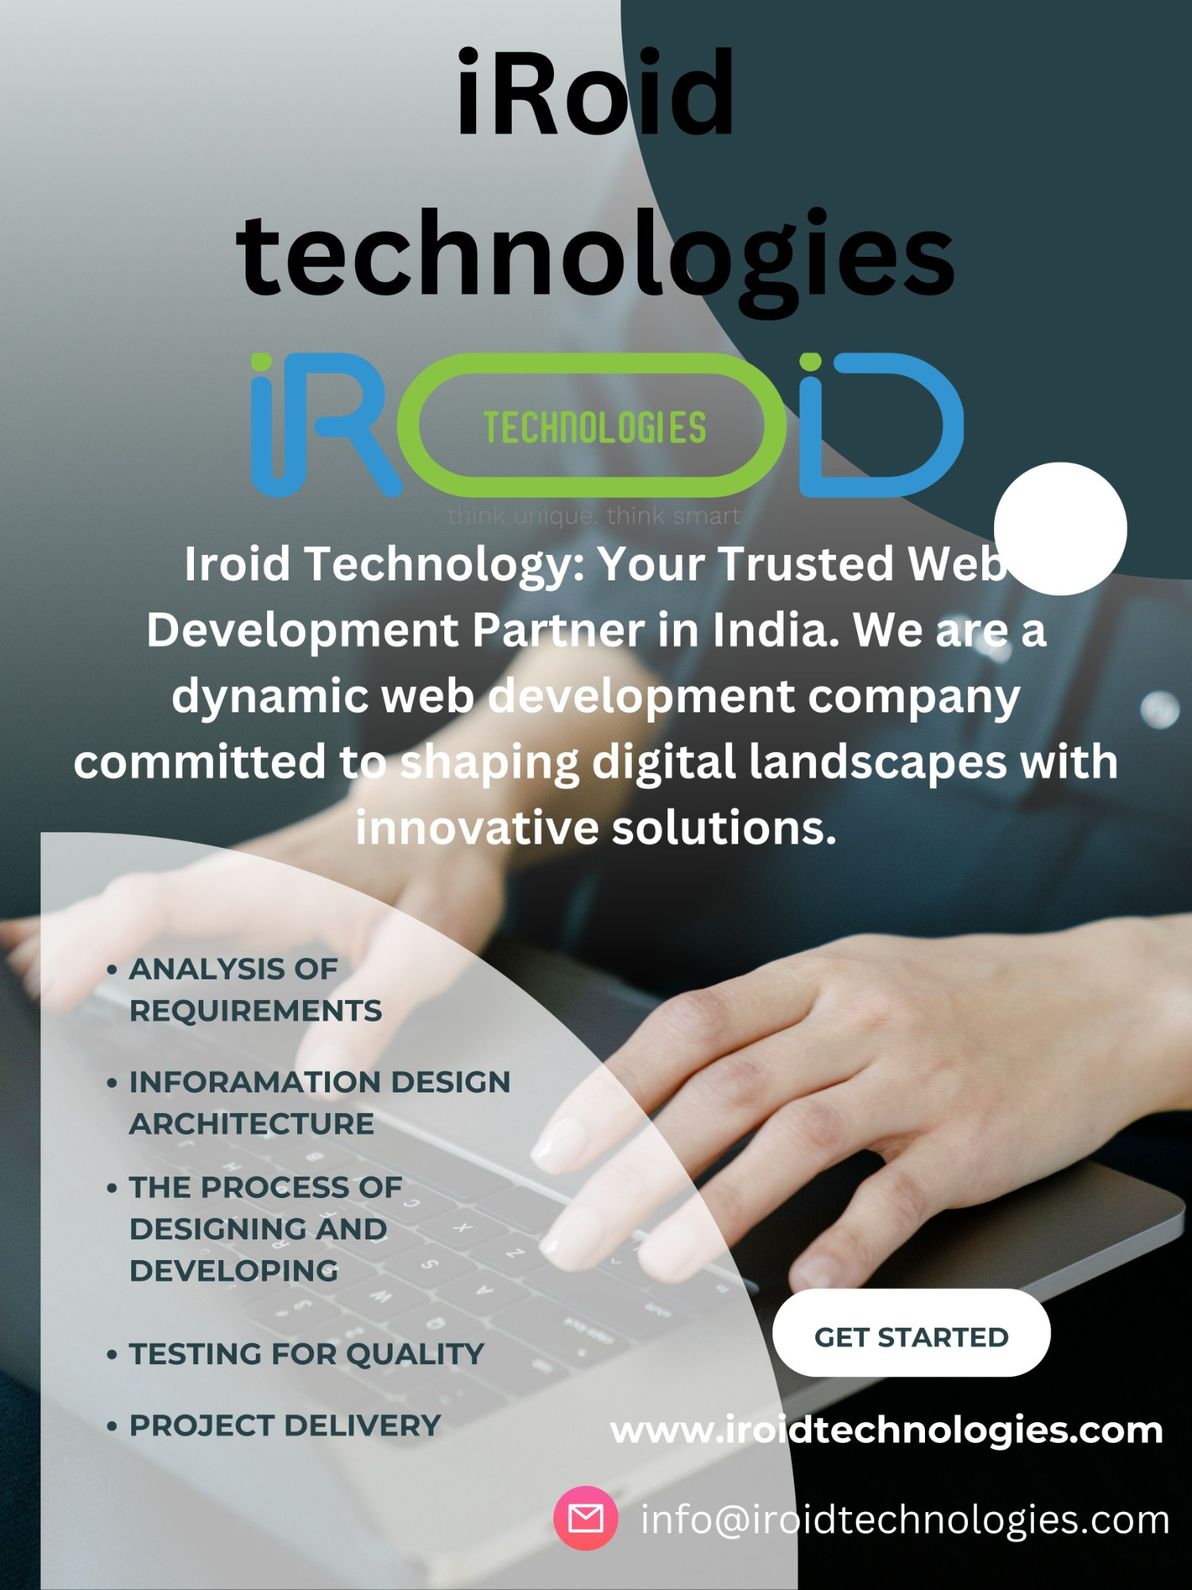 oo TTT
Iroid Sy Trusted w

Development Pagtger in India. We arg a
dynamic weh ®
committed

  

* ANALYSIS OF
REQUIREMENTS

« INFORAMATION DESIGN 7%
ARCHITECTURE 7a
« THE PROCESS OF

DESIGNING AND
DEVELOPING

* TESTING FOR QUALITY

* PROJECT DELIVERY

idtechnologies.com